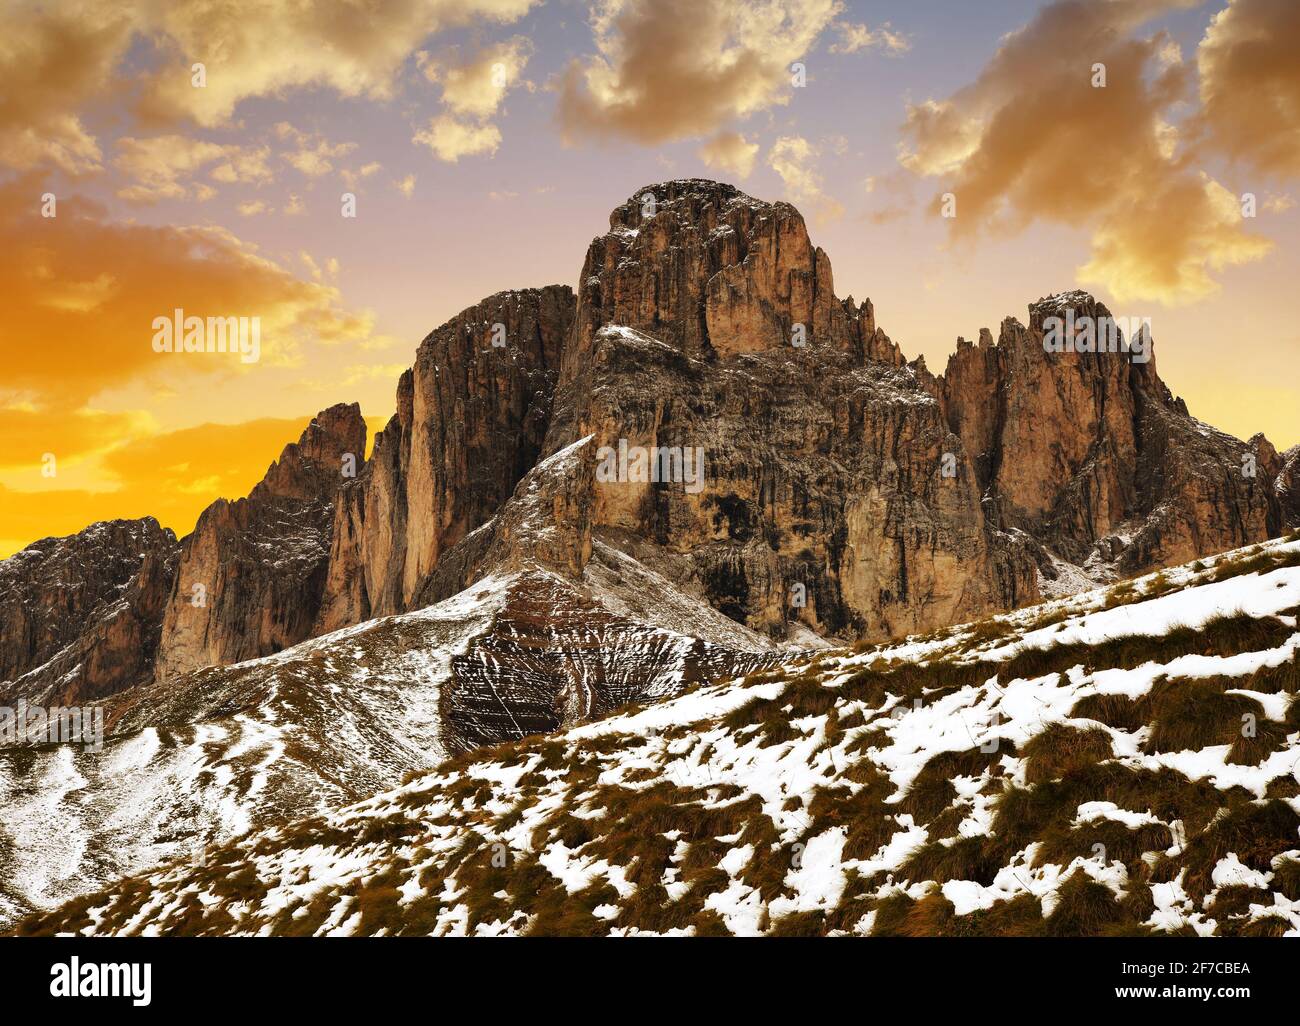 Mountain group Sassolungo (Langkofel) at sunset. Beautiful snowy winter landscape in Dolomites. Province of Trento, South Tyrol, Italy. Stock Photo